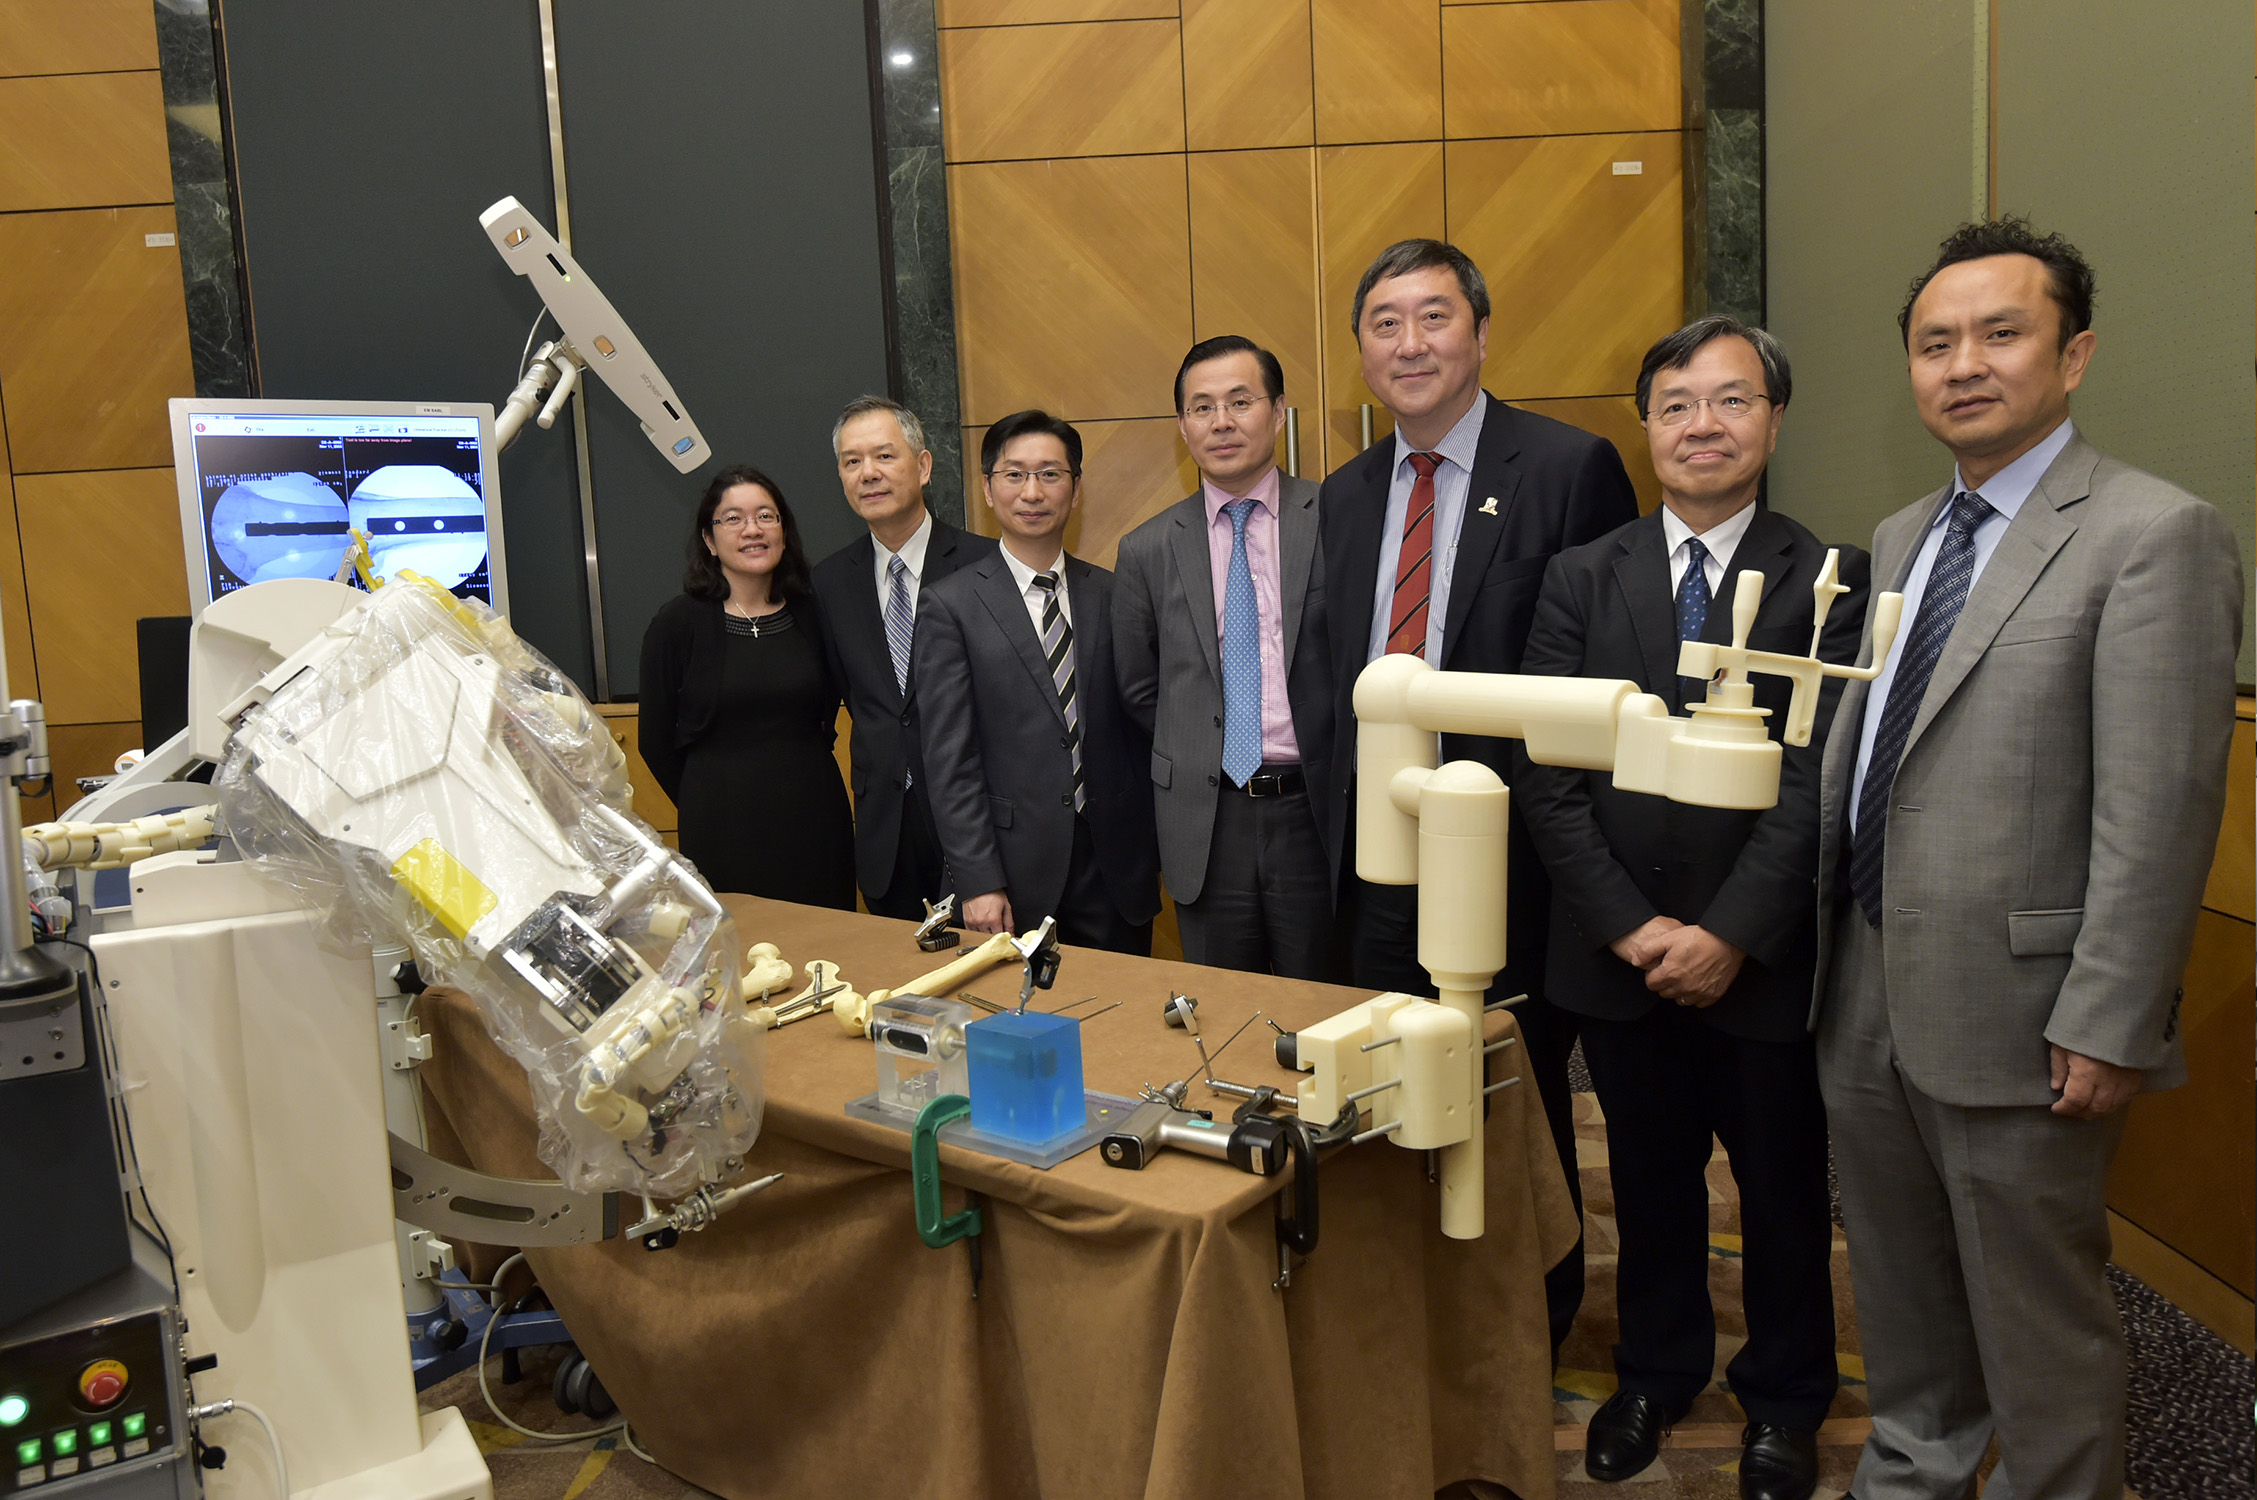 A group photo of the three officiating guests and CUHK researchers involving in the development of biomedical robotics